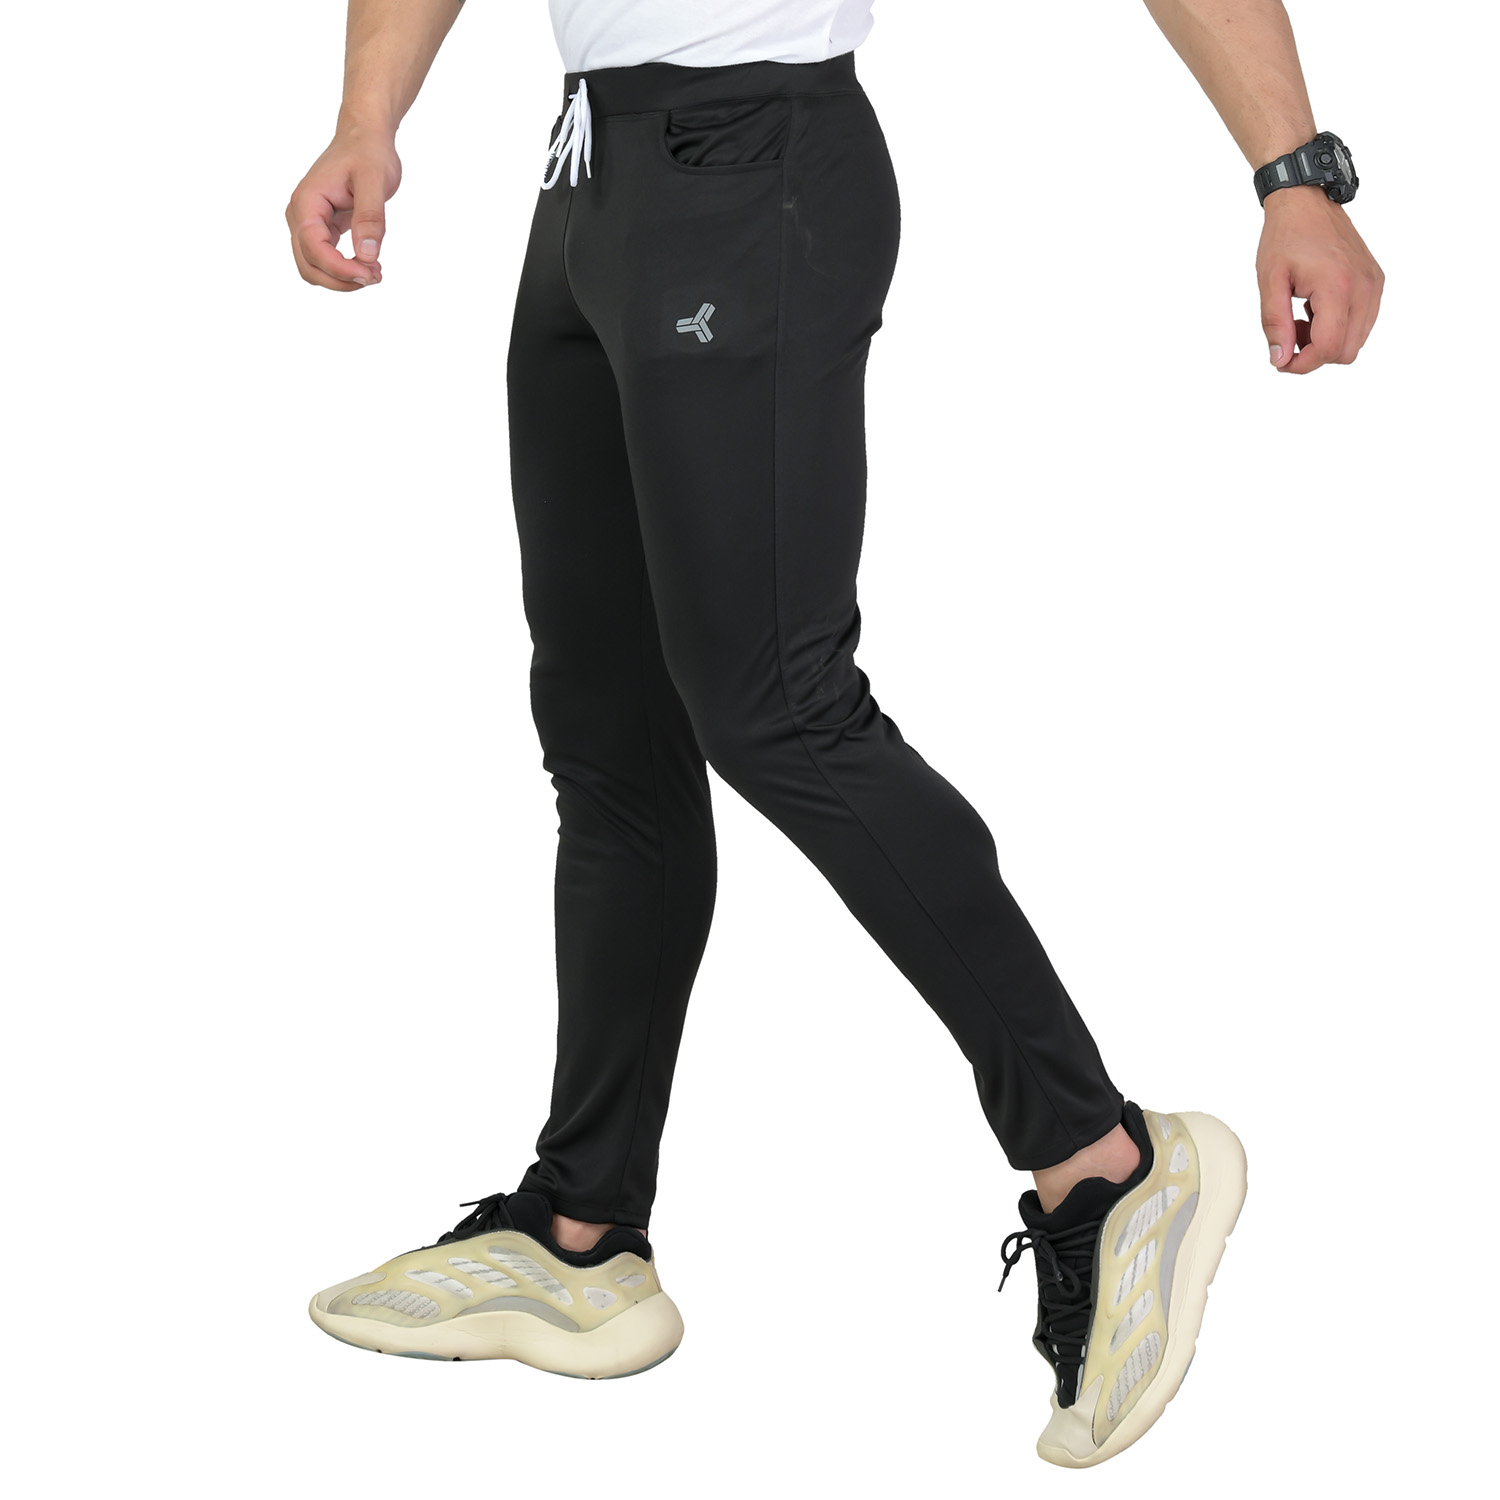 Men's Moisture Wicking Sports Track Pants - Global Textile Source